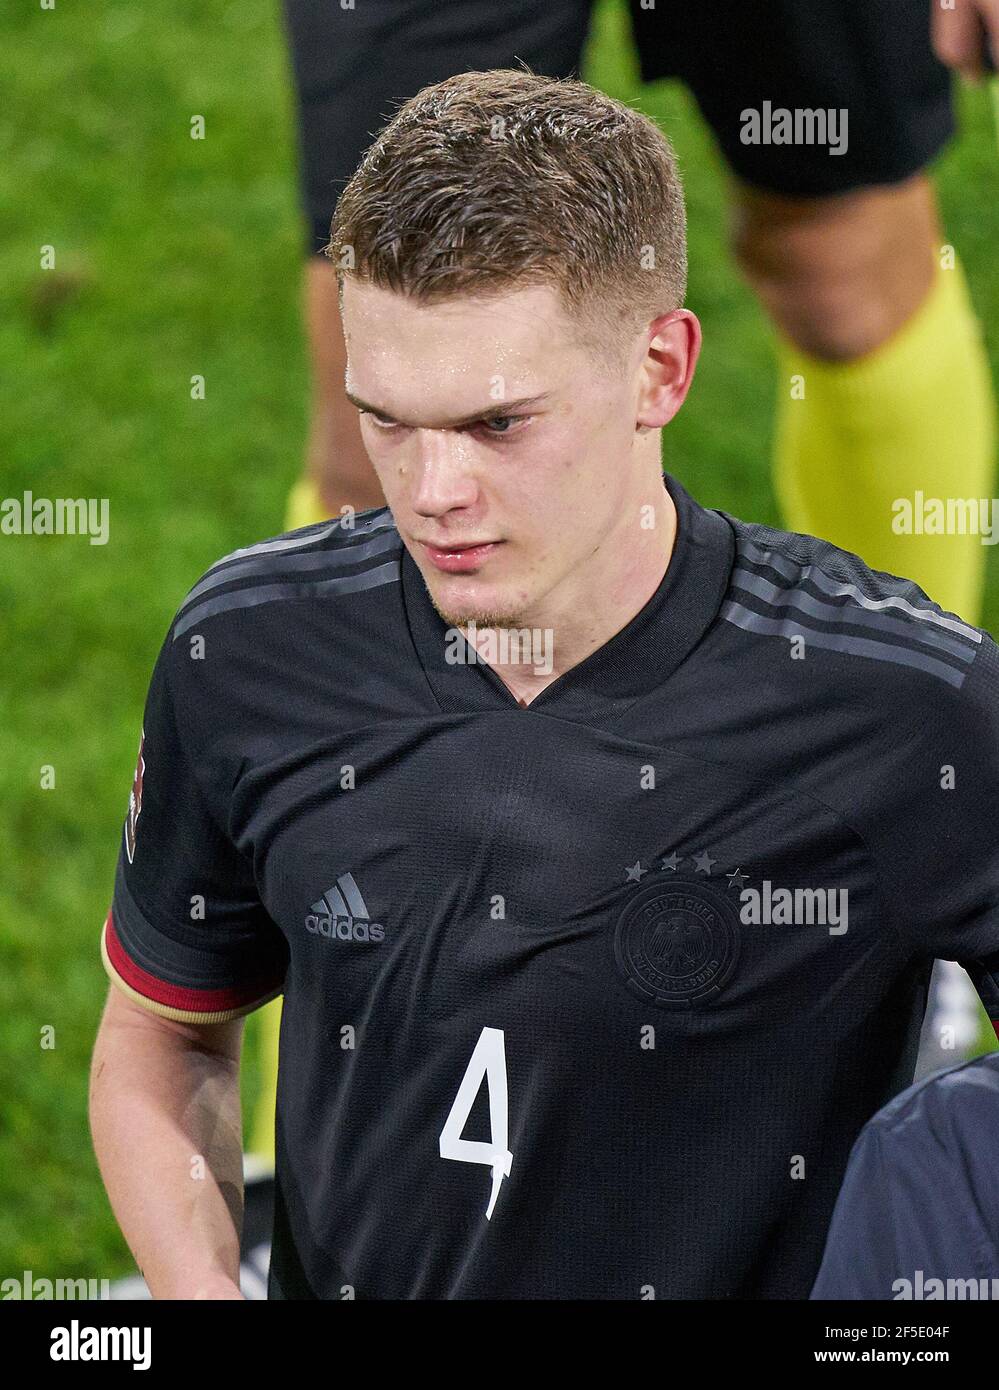 Matthias GINTER, DFB 4  half-size, portrait, one person, single, Aktion, Einzelbild, angeschnittenes Einzelmotiv, Halbfigur, halbe Figur,  in the match GERMANY - ICELAND 3-0 Deutschland - ISLAND 3-0 Qualification for World Championships, WM Quali, Season 2020/2021,  March 25, 2021  in Duisburg, Germany.  © Peter Schatz / Alamy Live News  Important: DFB regulations prohibit any use of photographs as image sequences and/or quasi-video. Stock Photo